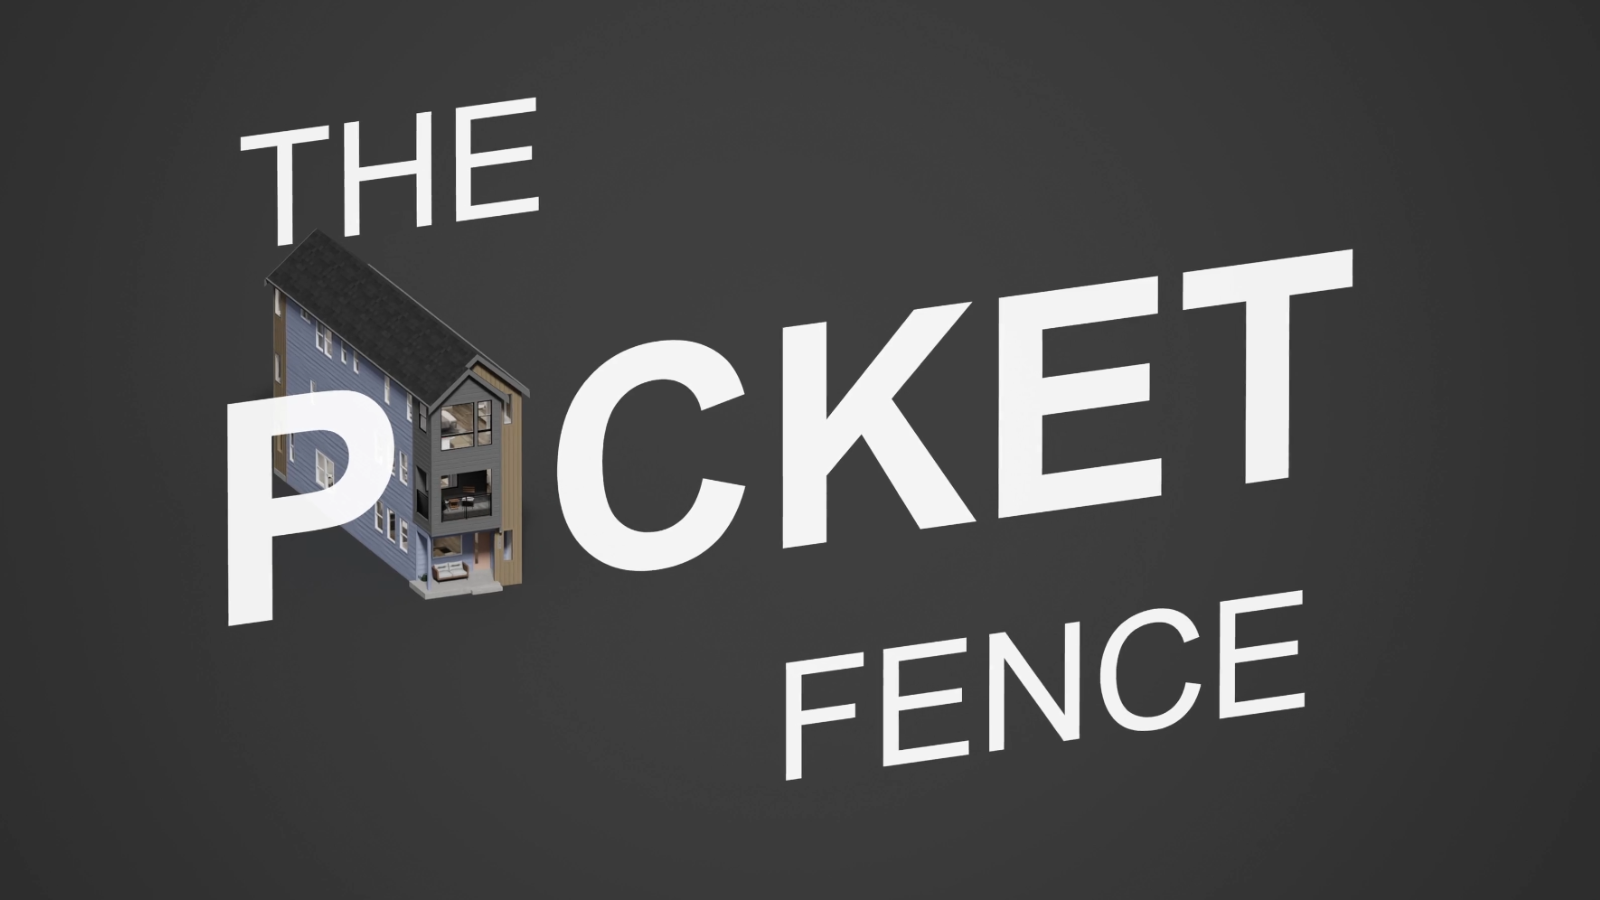 The Picket Fence 7D Hero Image